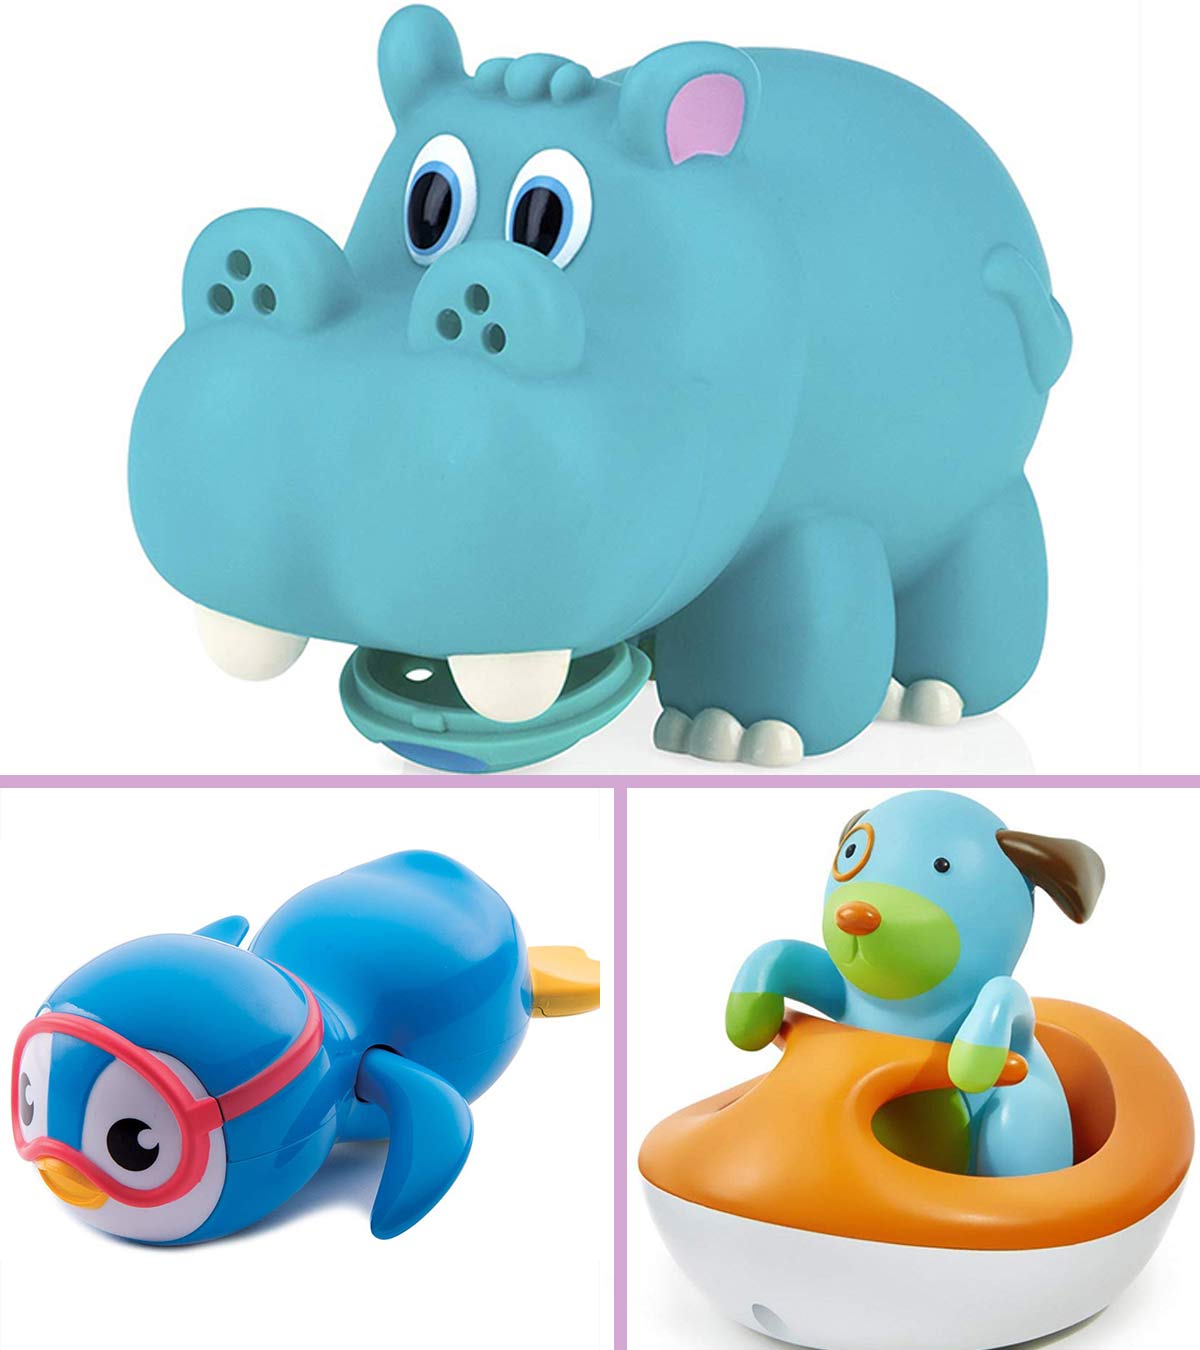 15 Best Bath Toys For Toddlers in 2021